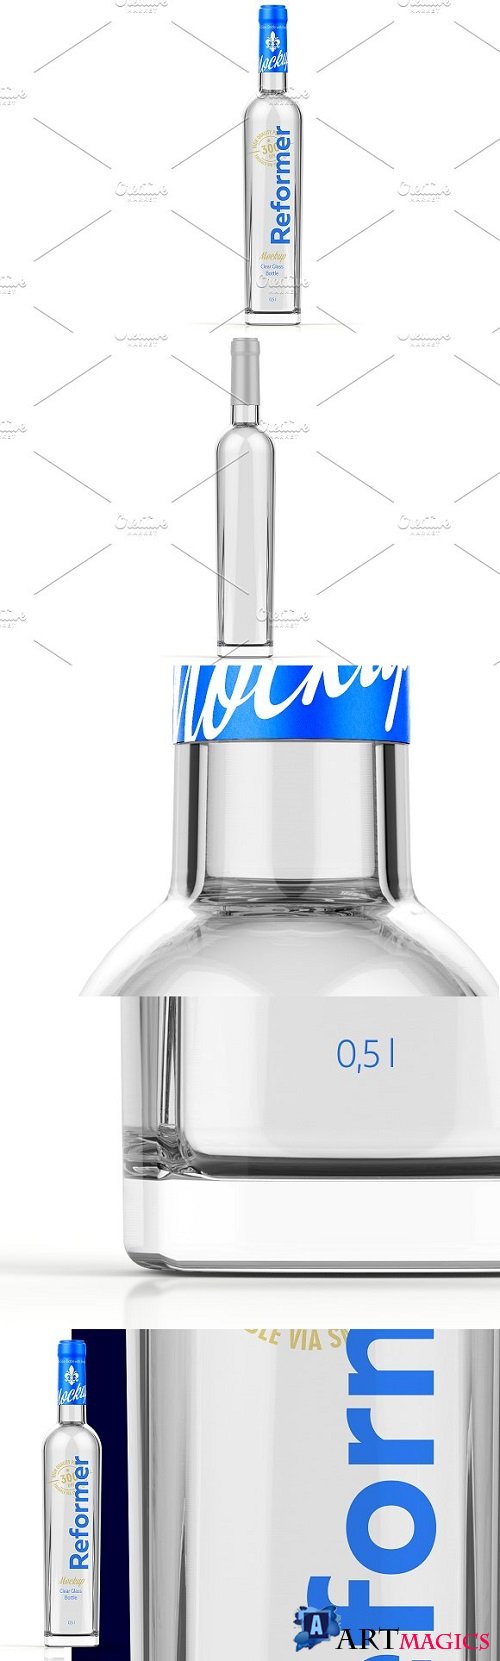 Clear Glass Bottle with Gin Mockup 0 2117946